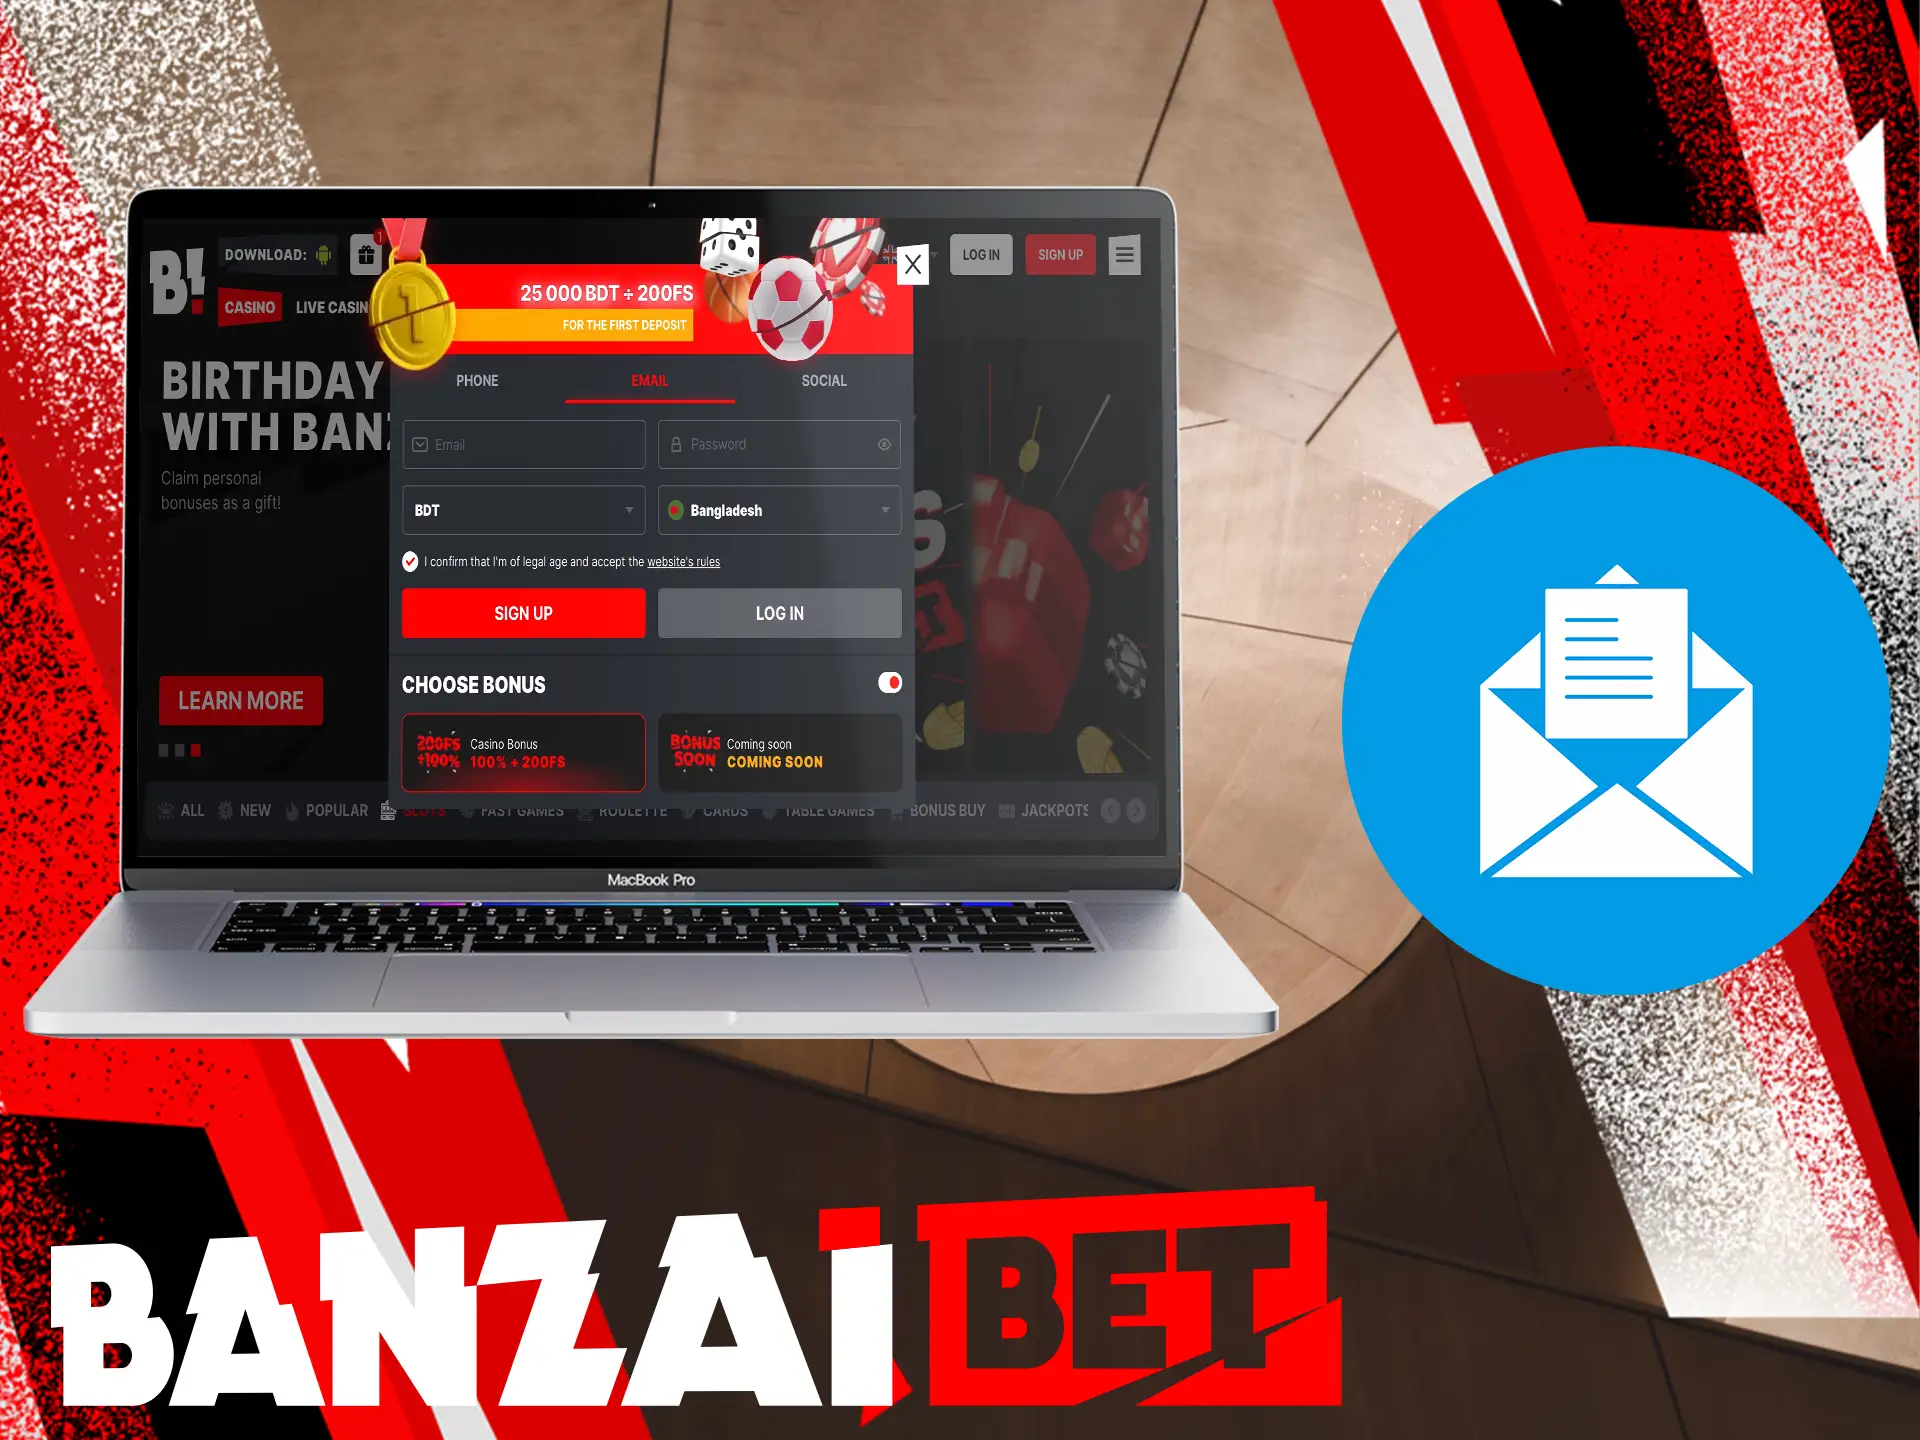 You can also create a Banzai Bet account using your email account, just follow these steps.